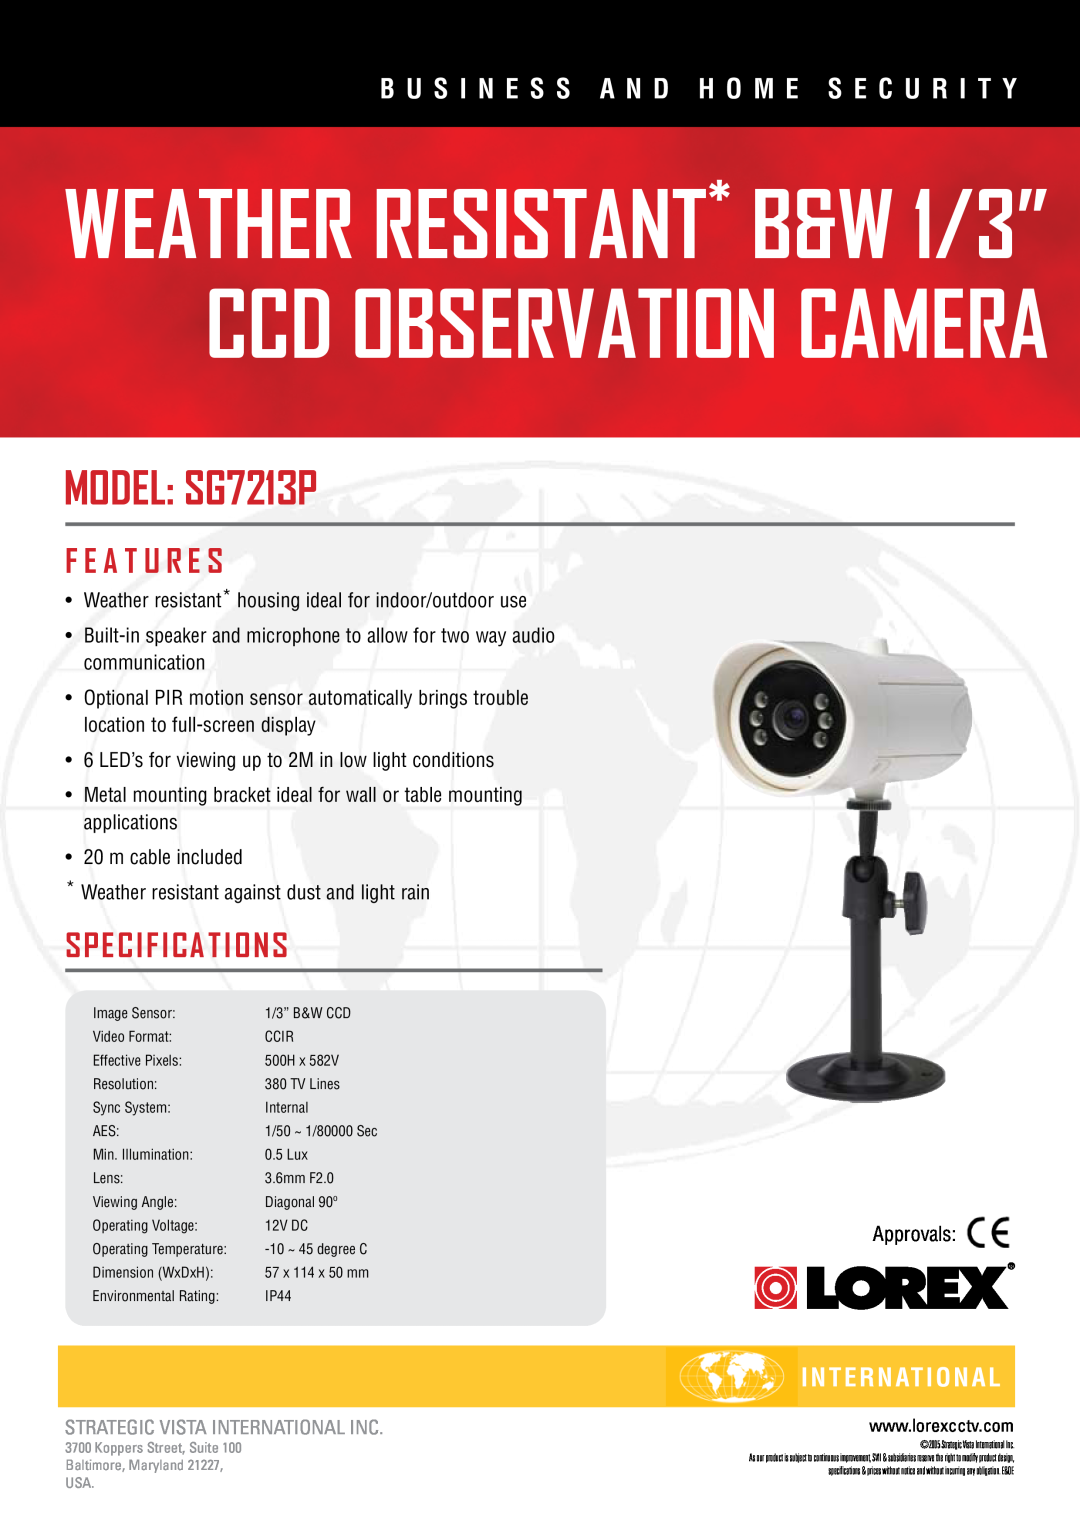 LOREX Technology specifications WEATHER RESISTANT* B&W 1/3” CCD OBSERVATION CAMERA, MODEL SG7213P, F E A T U R E S 